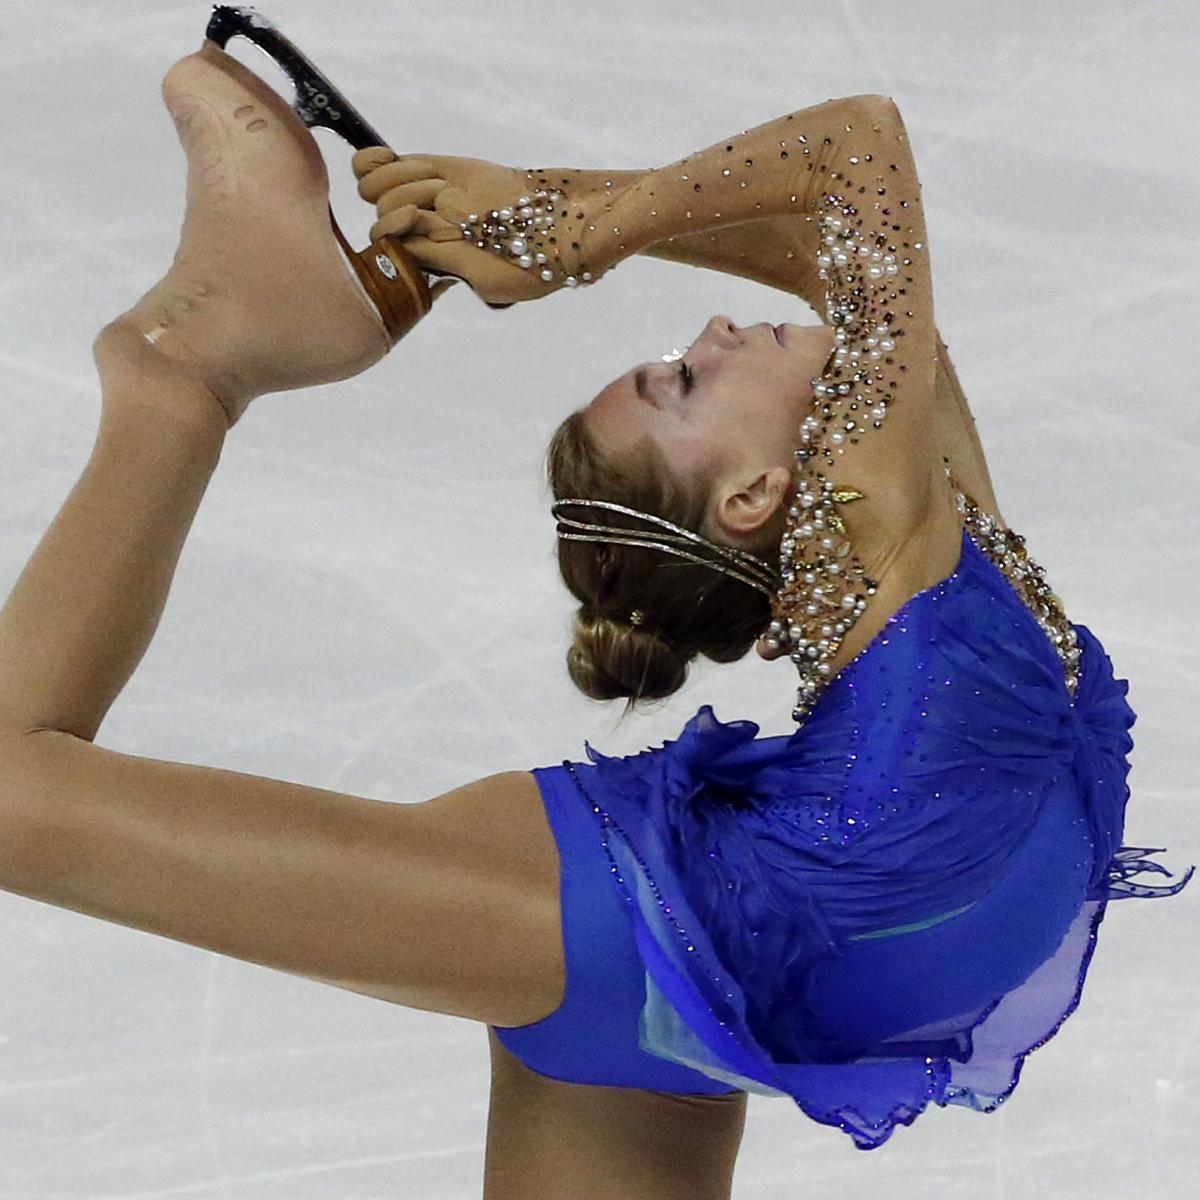 ISU Figure Skating Grand Prix 2014: Results, Top Finishers from France | Bleacher Report